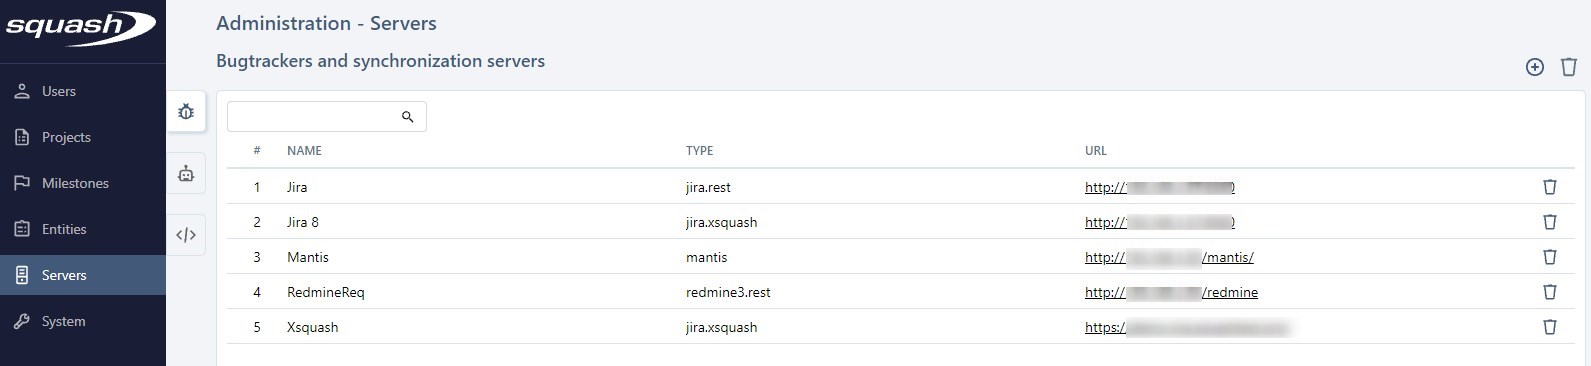 Table - Manage bugtrackers and synchronization servers